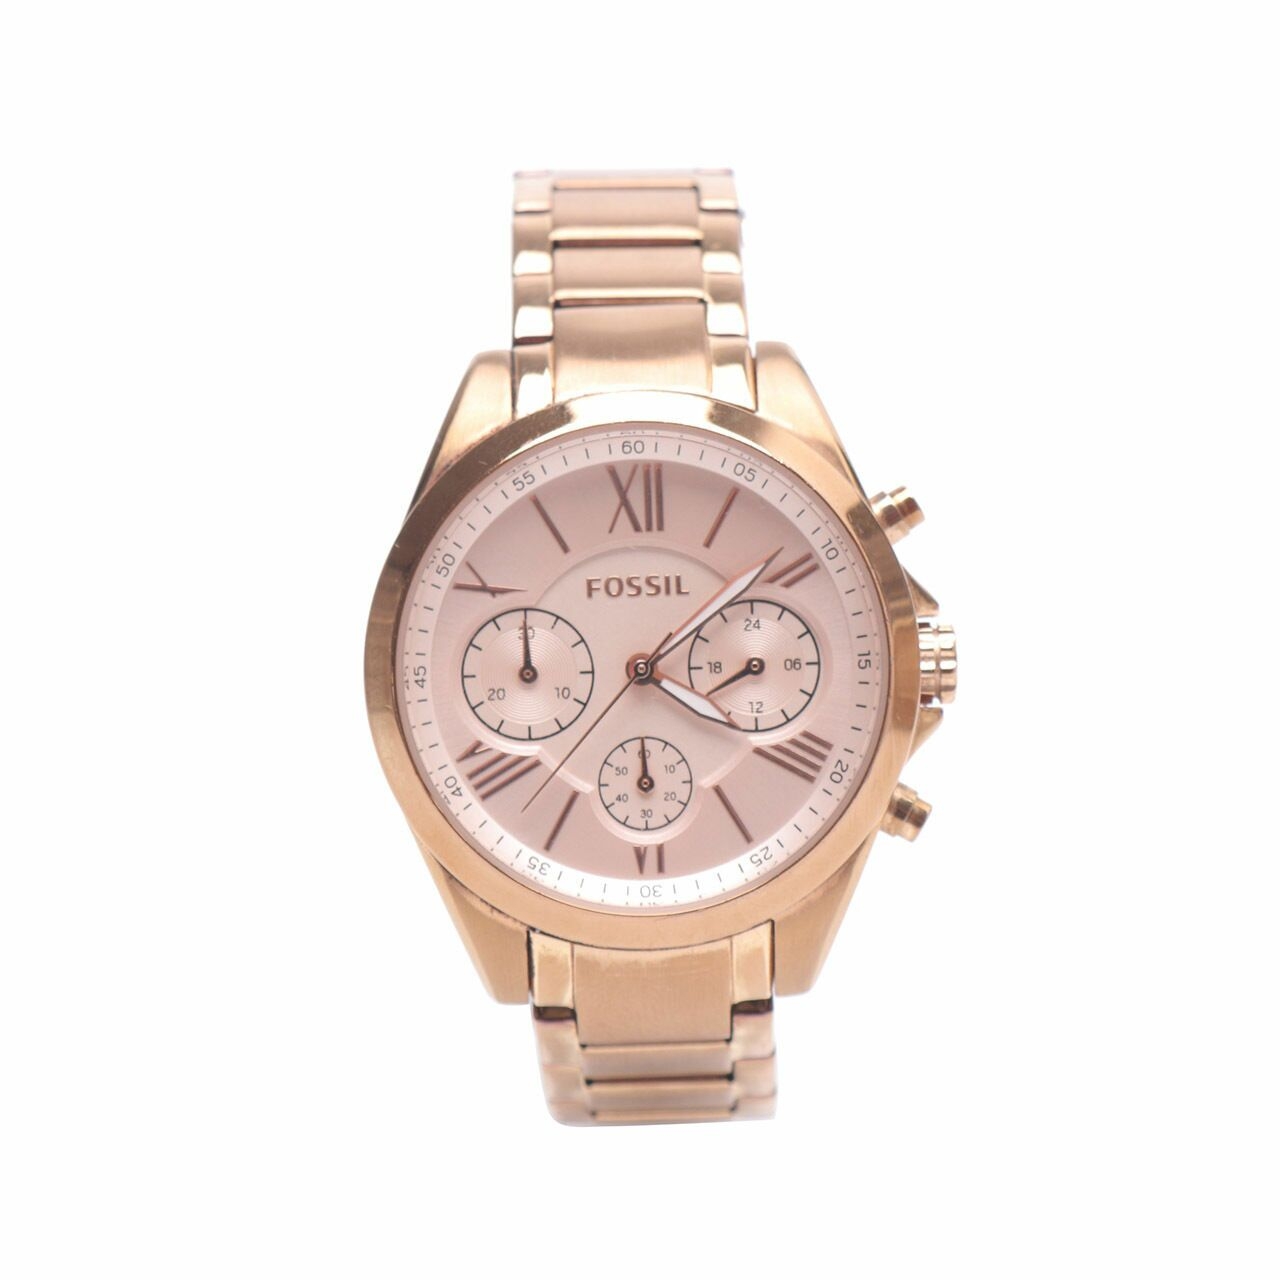 Fossil Modern Courier Midsize Chronograph Rose Gold-Tone Stainless Steel Watch